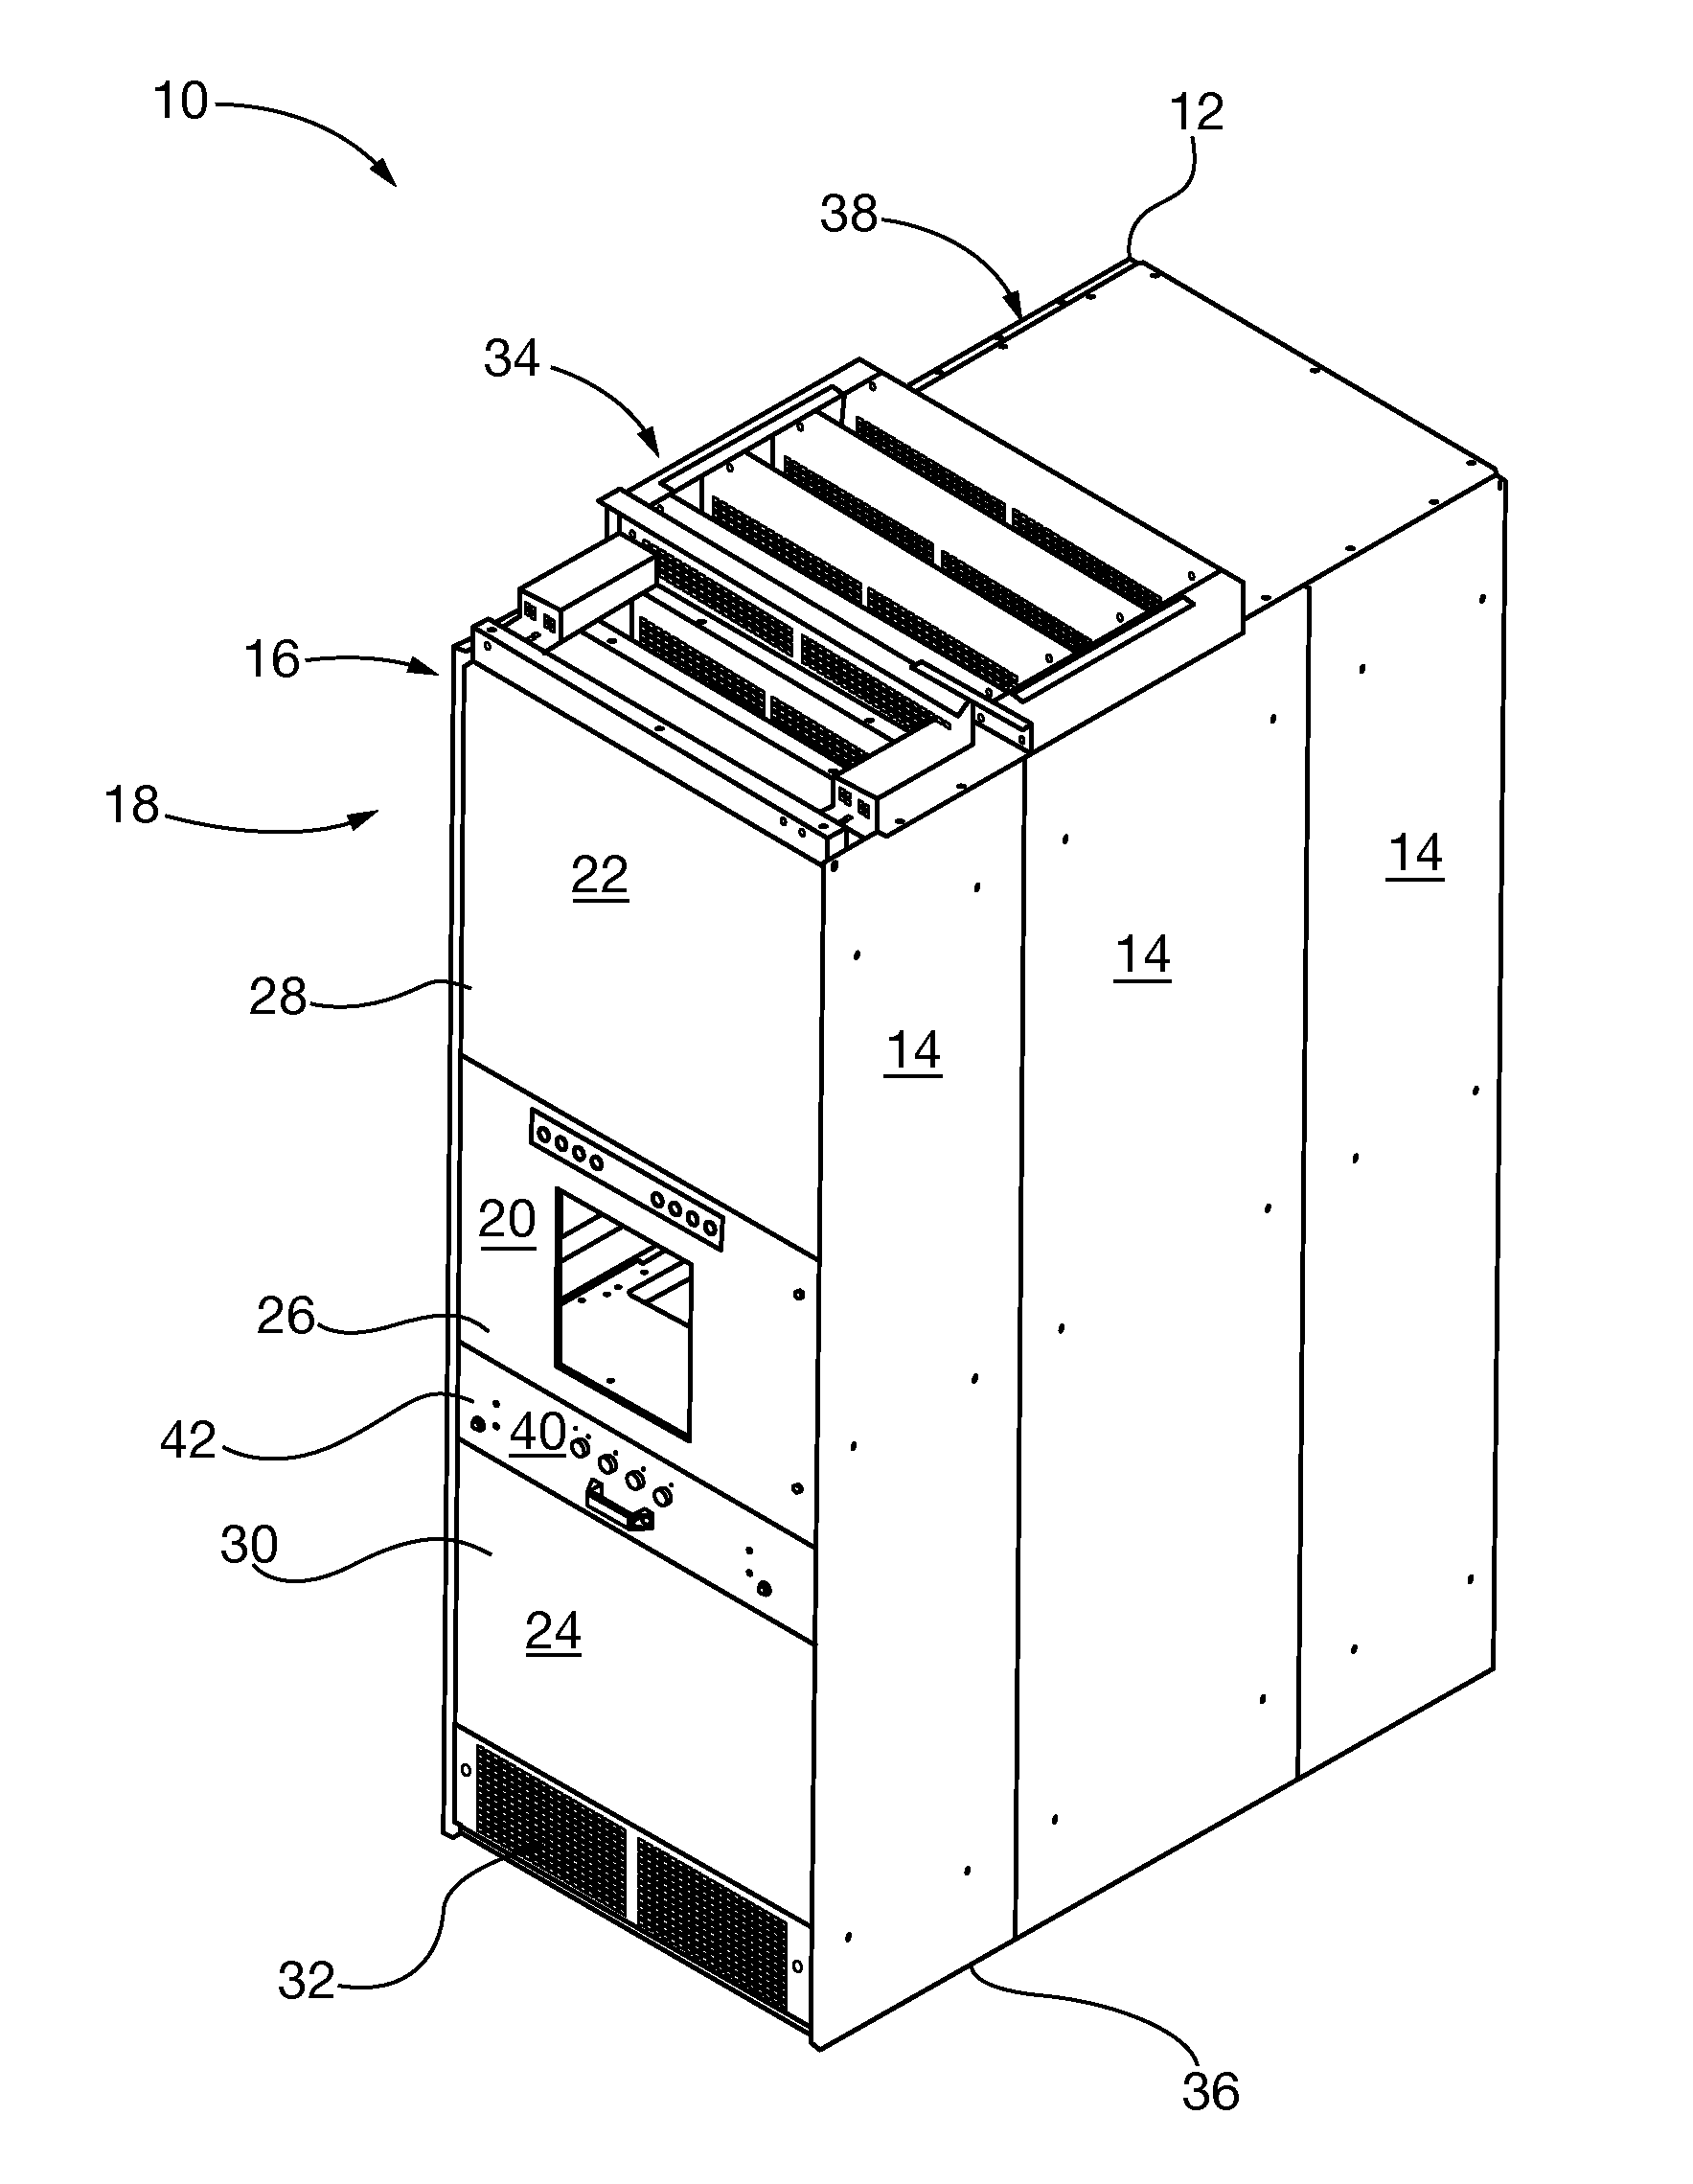 Modular draw out fan module with chimney design for cooling components in low voltage switchgear